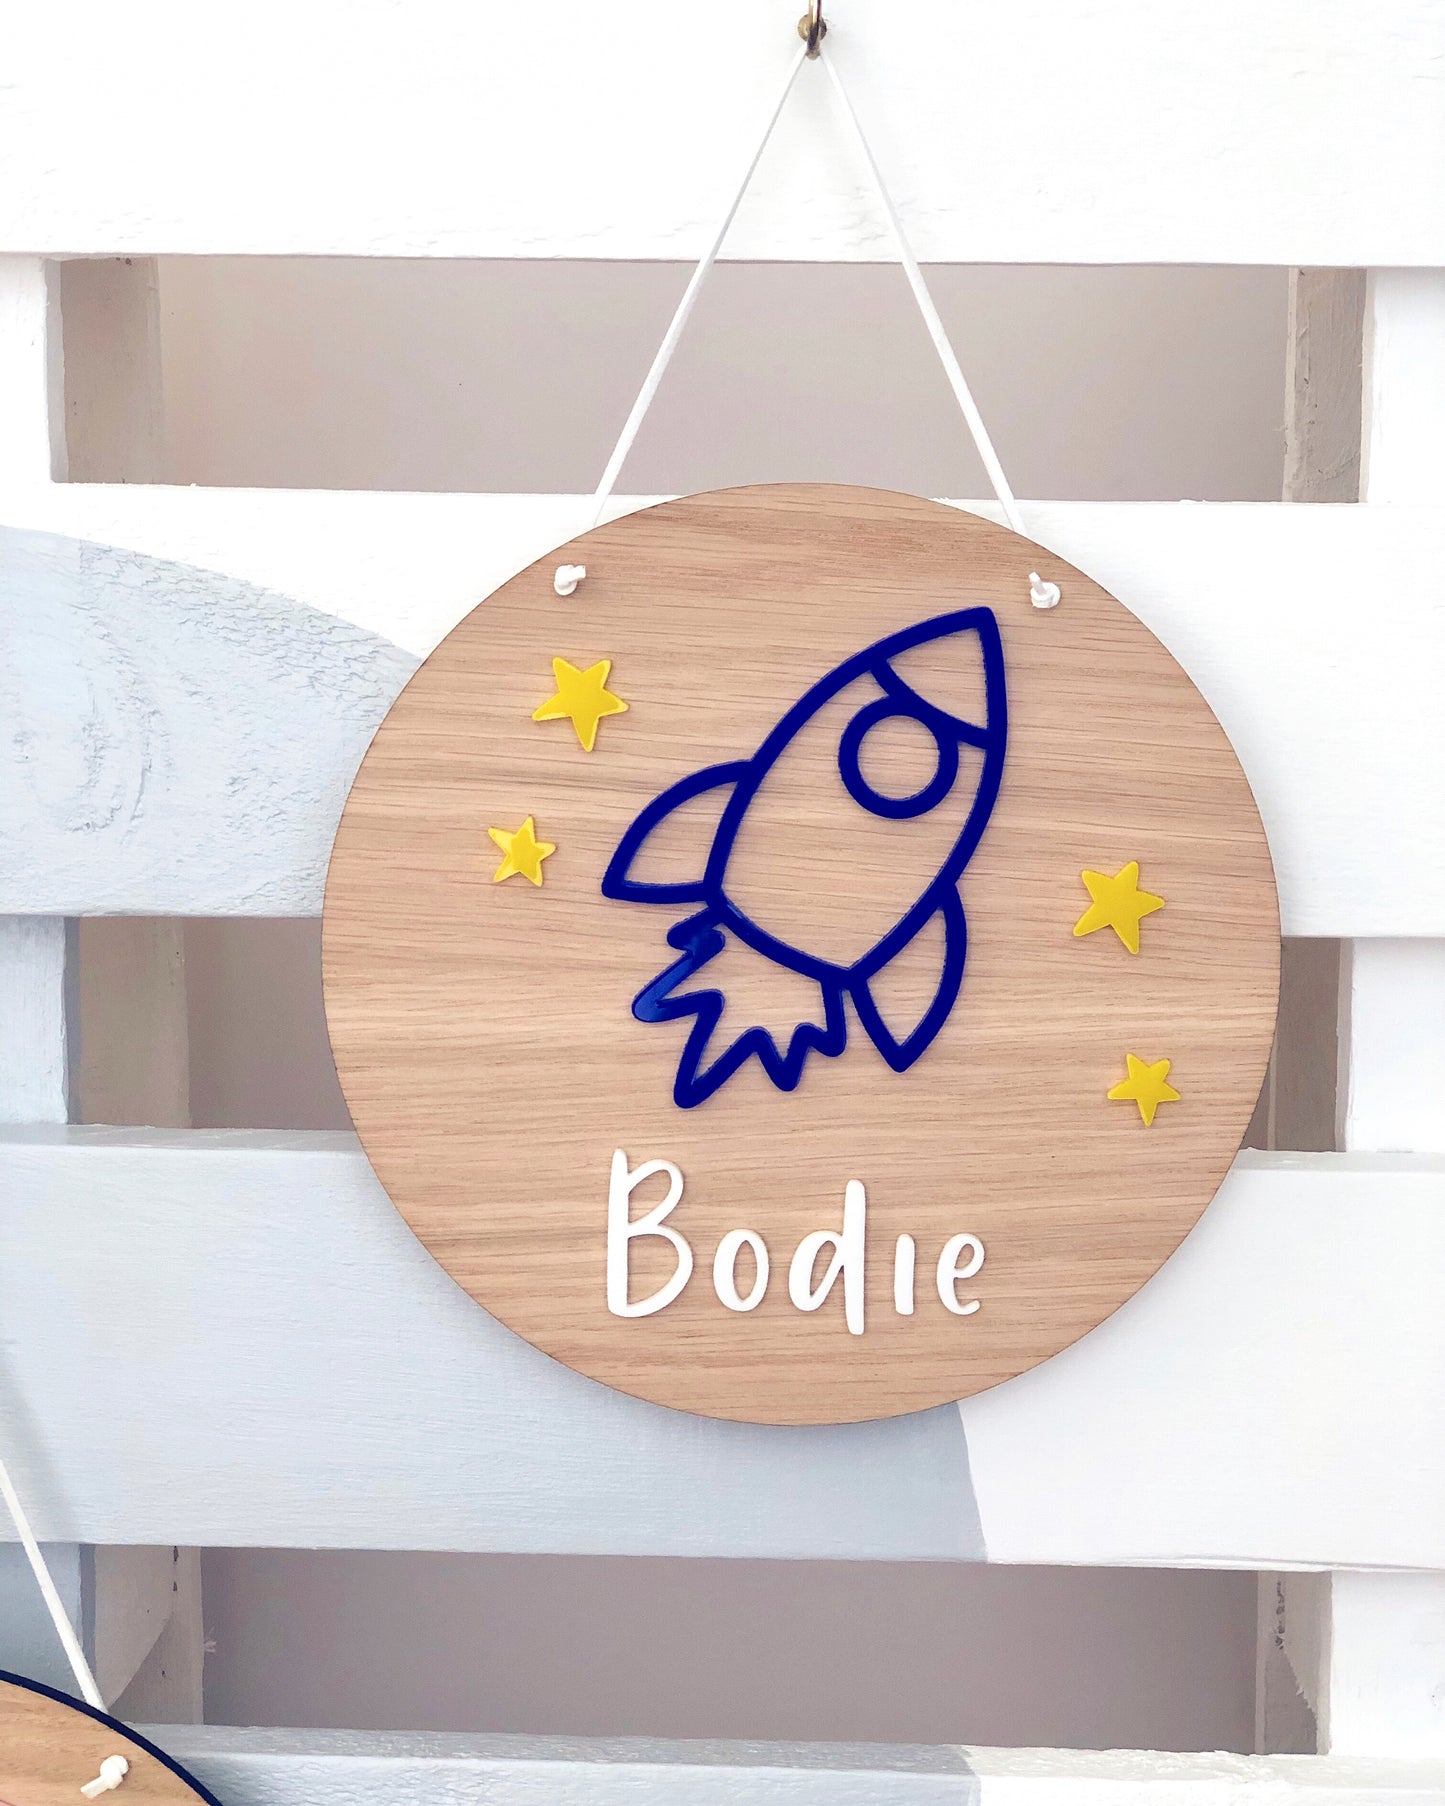 wooden plaque with acrylic blue rocket and yellow stars. Personlised with a name in white acrylic letters